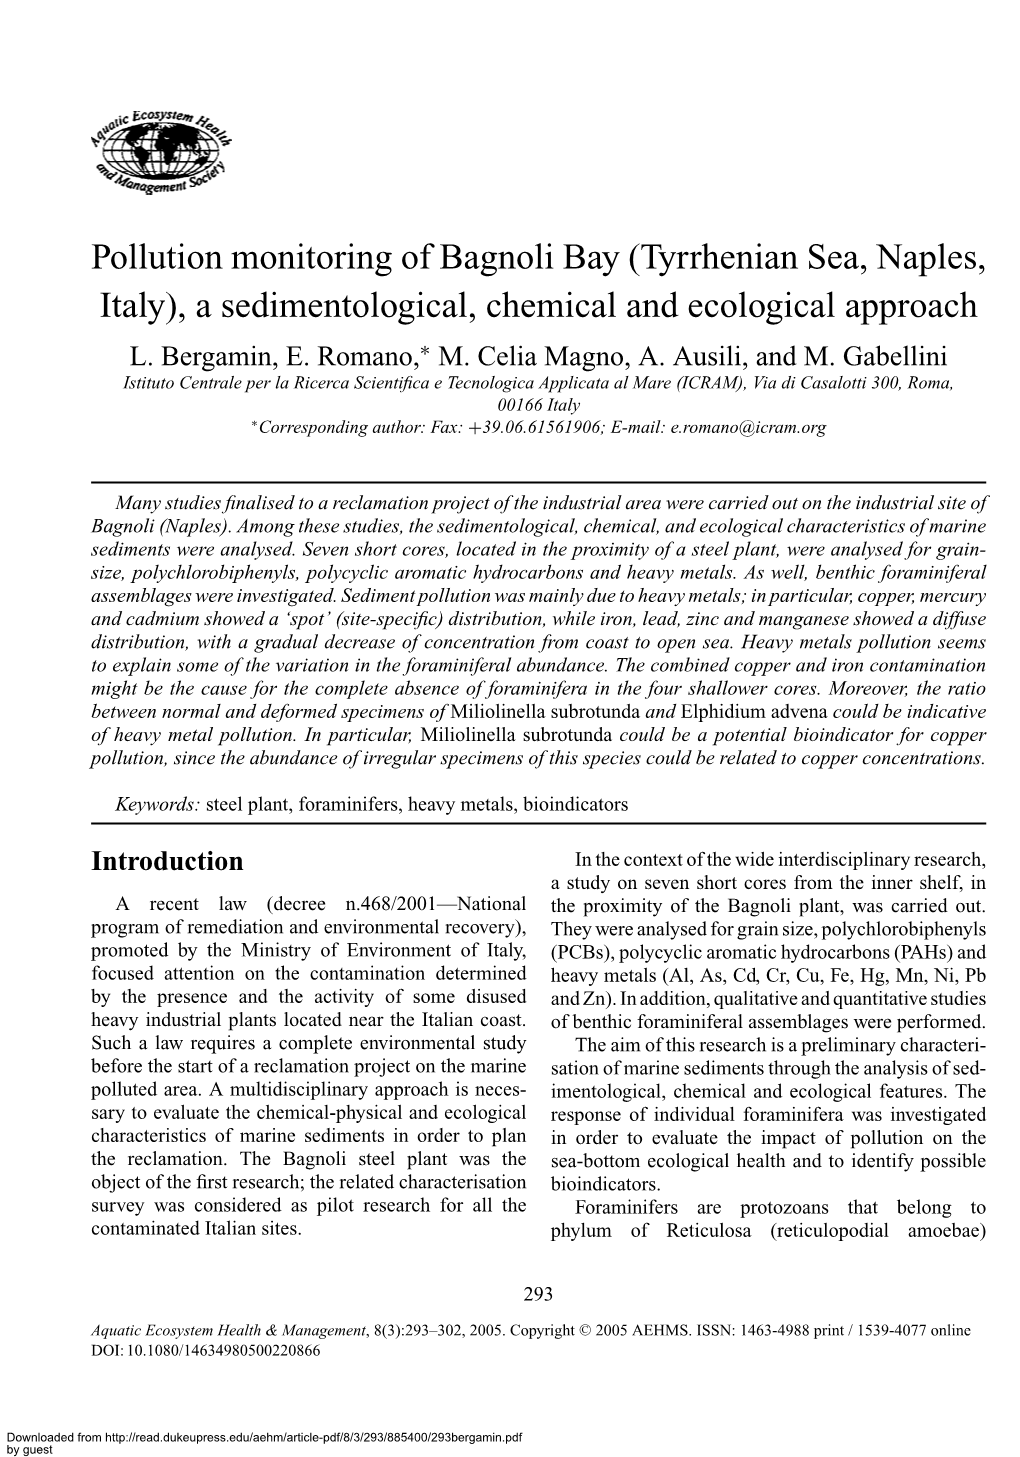 Pollution Monitoring of Bagnoli Bay (Tyrrhenian Sea, Naples, Italy), a Sedimentological, Chemical and Ecological Approach L